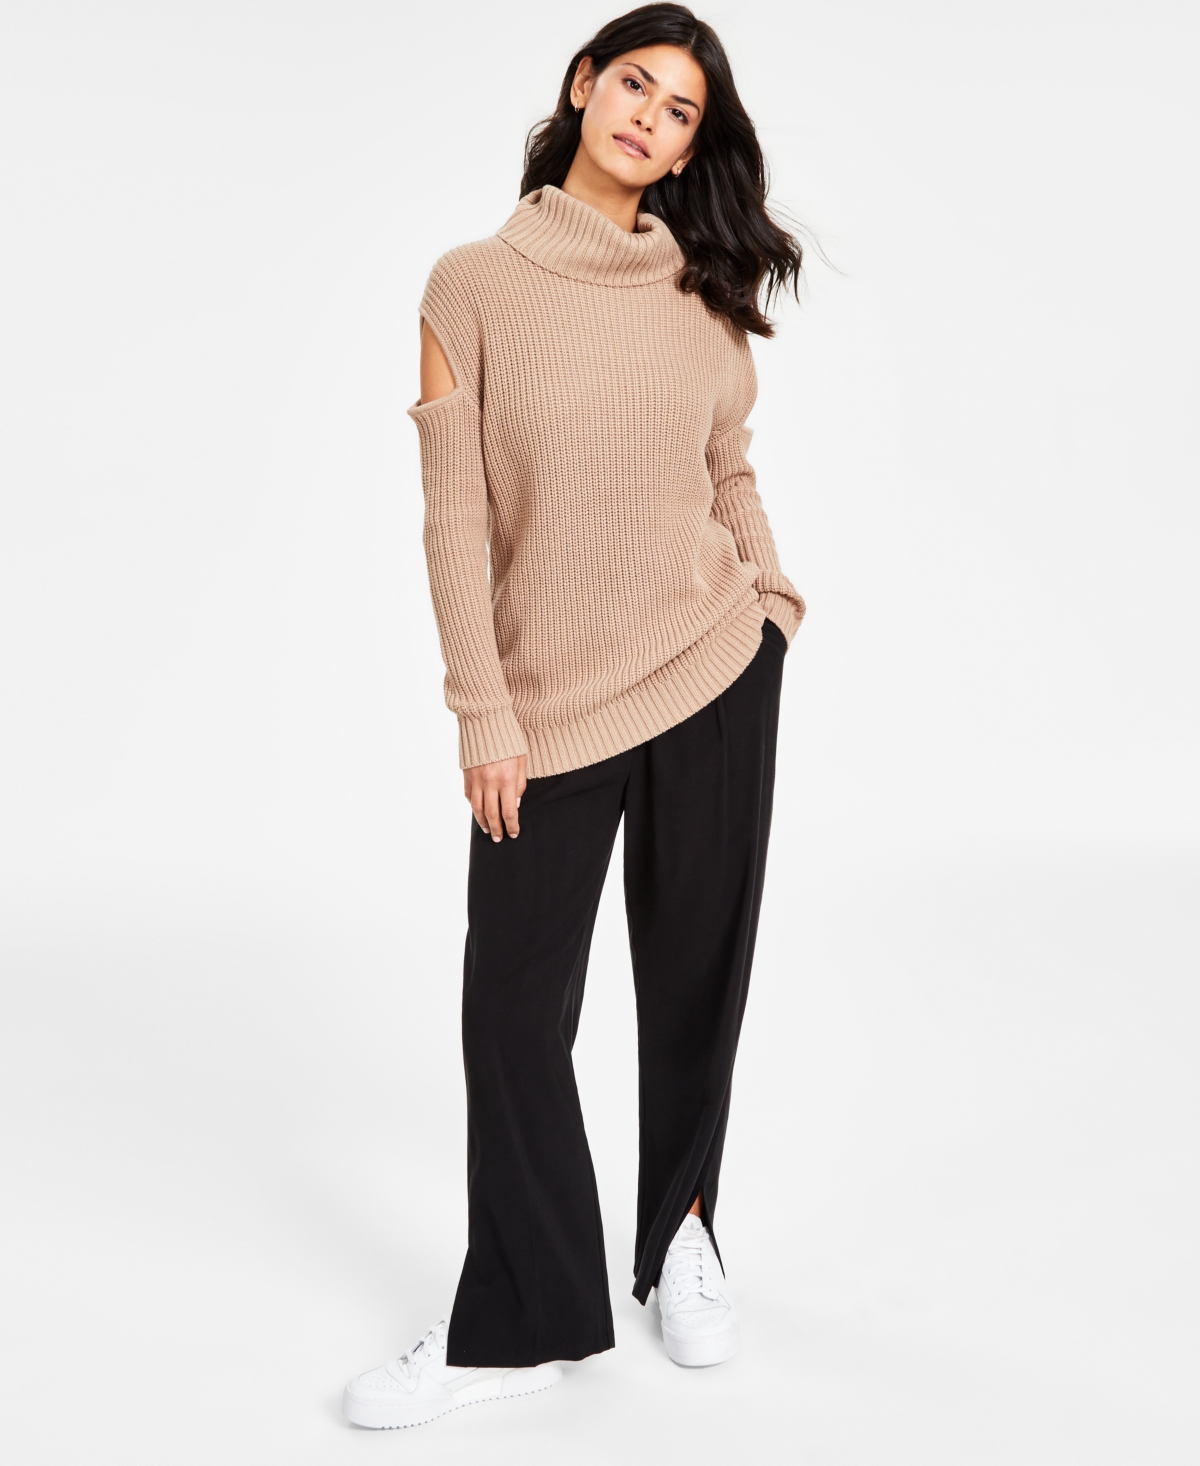 Bar Iii Women's Turtleneck Cutout Sweater, Created For Macy's In Warm Ginger